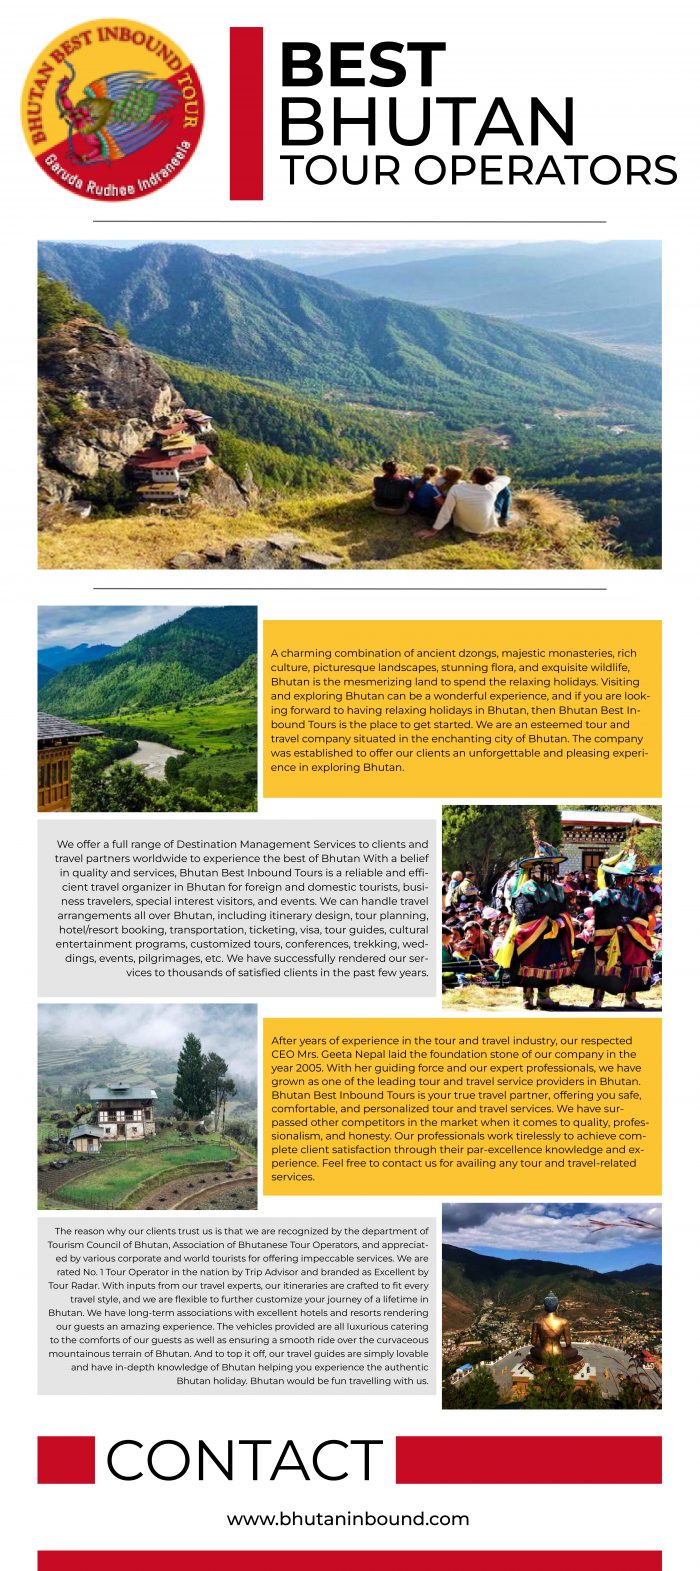 Looking to contract with the Best Bhutan Tour Operators? Give a Call to Bhutan Inbound.